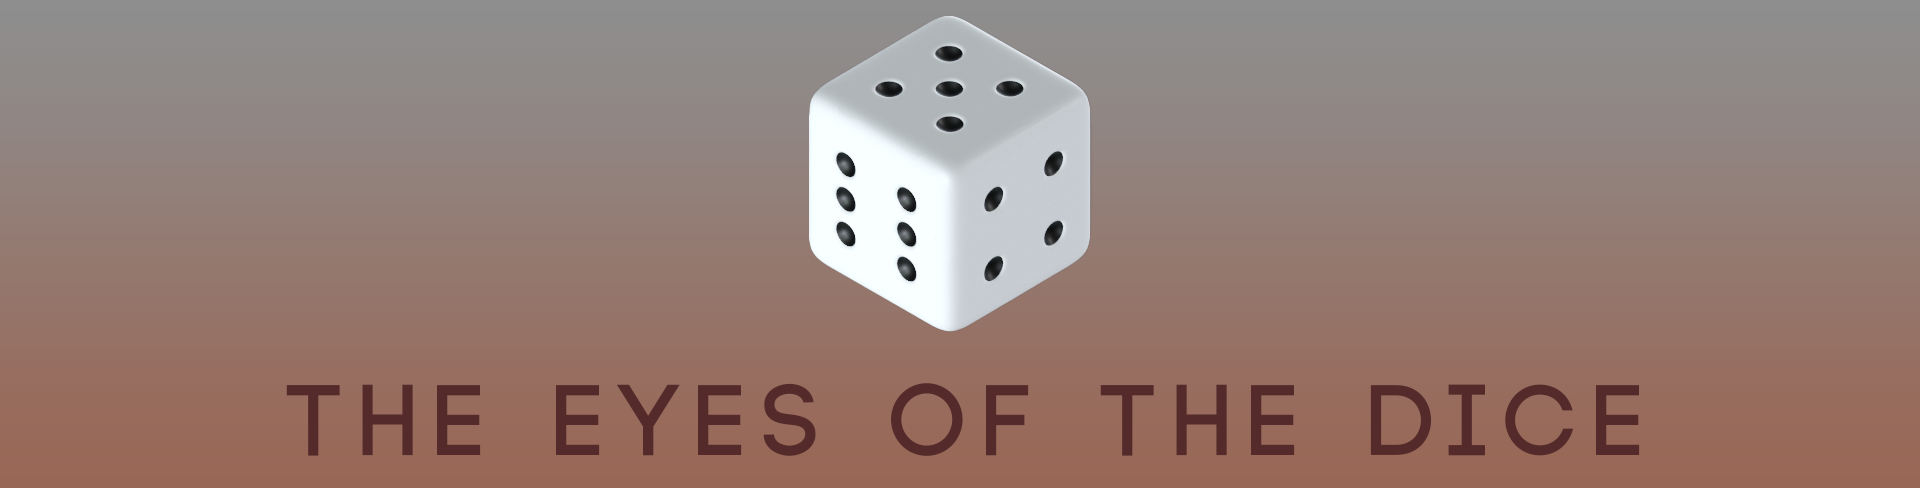 Eyes Of The Dice